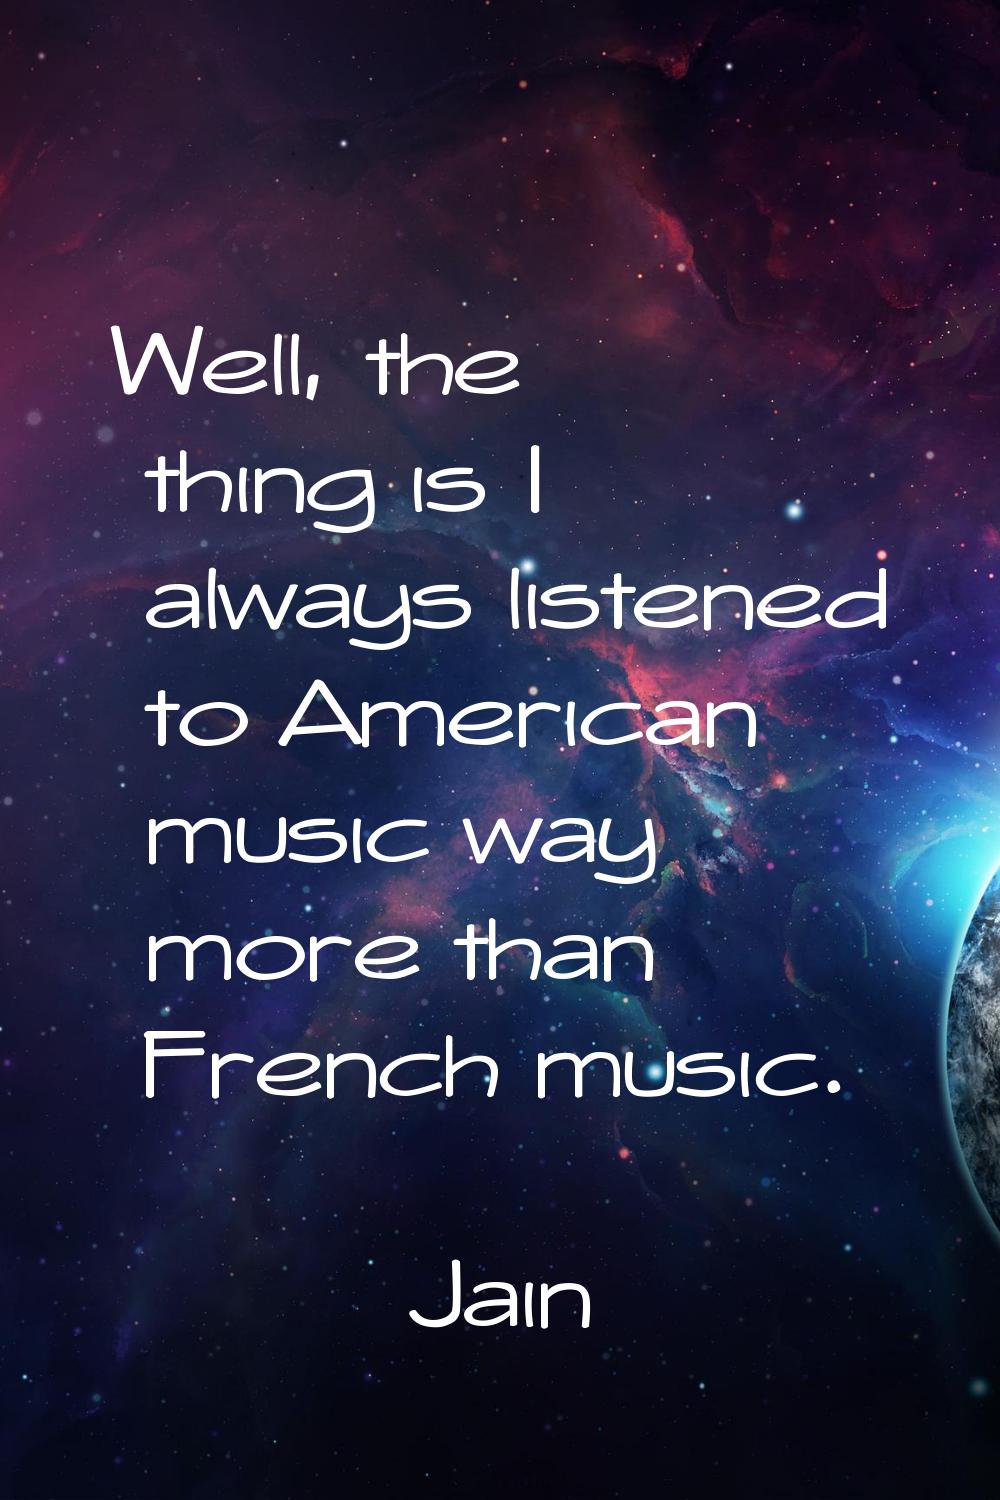 Well, the thing is I always listened to American music way more than French music.